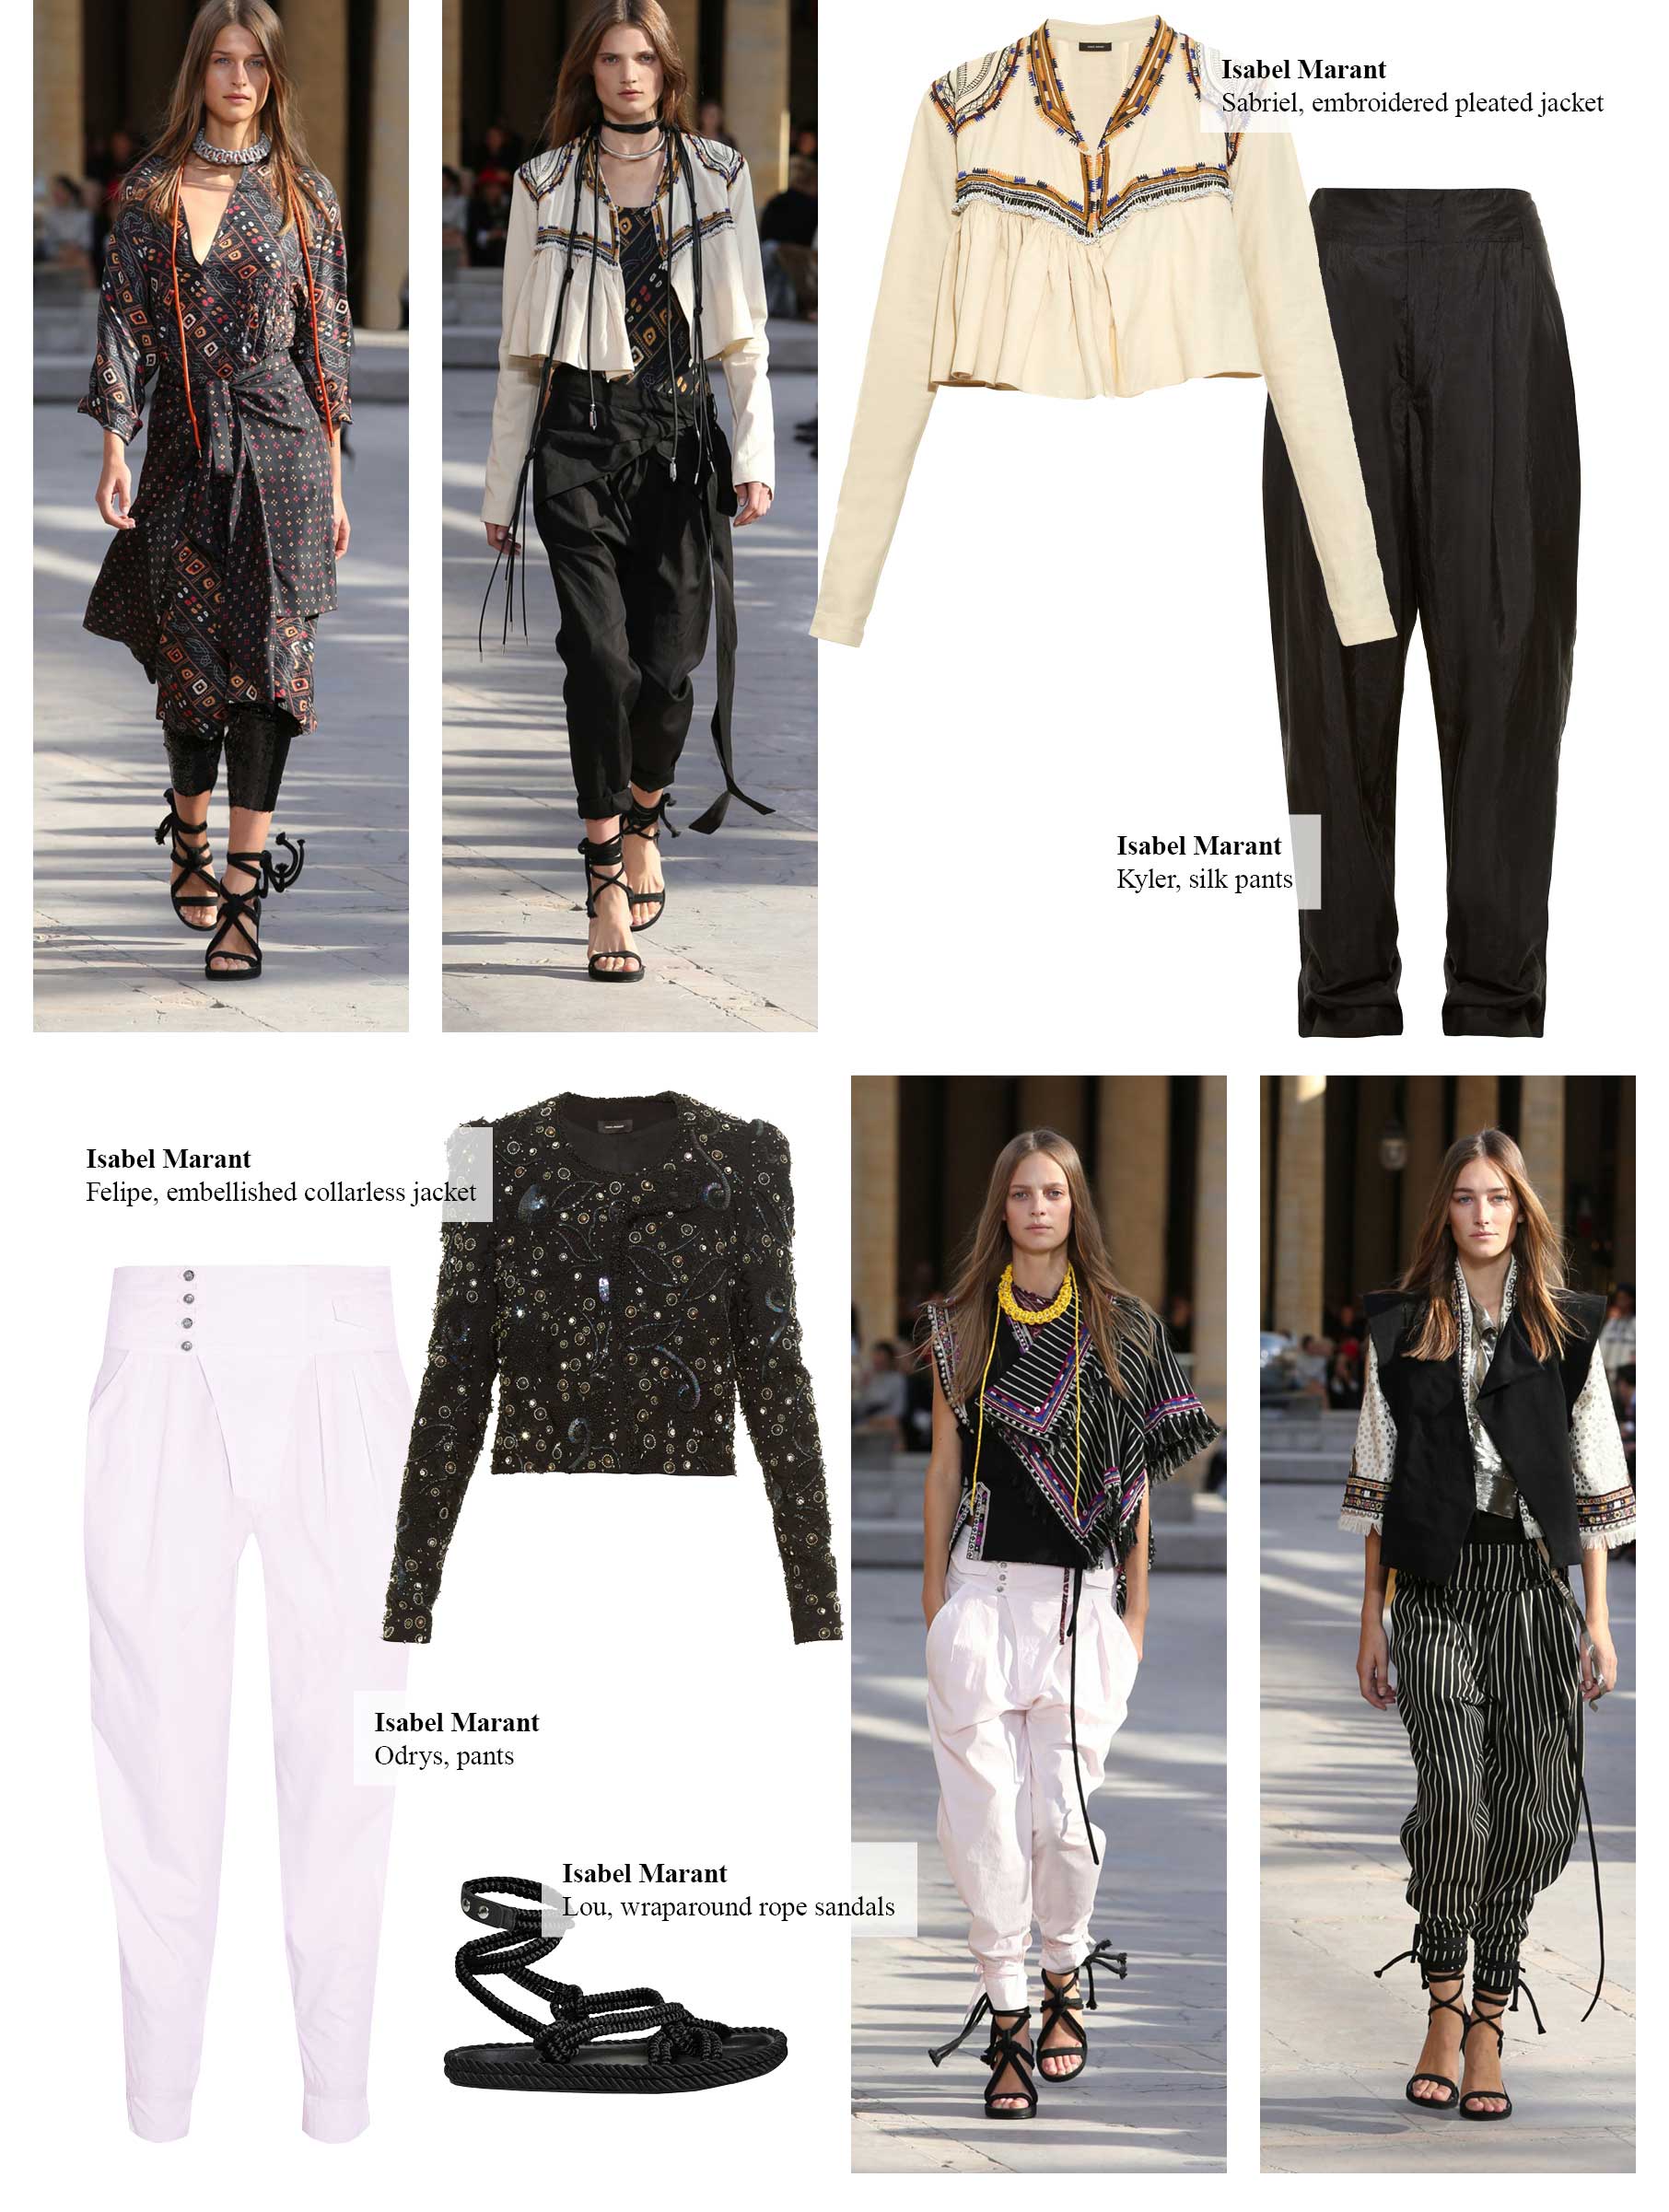 Isabel Marant new collection